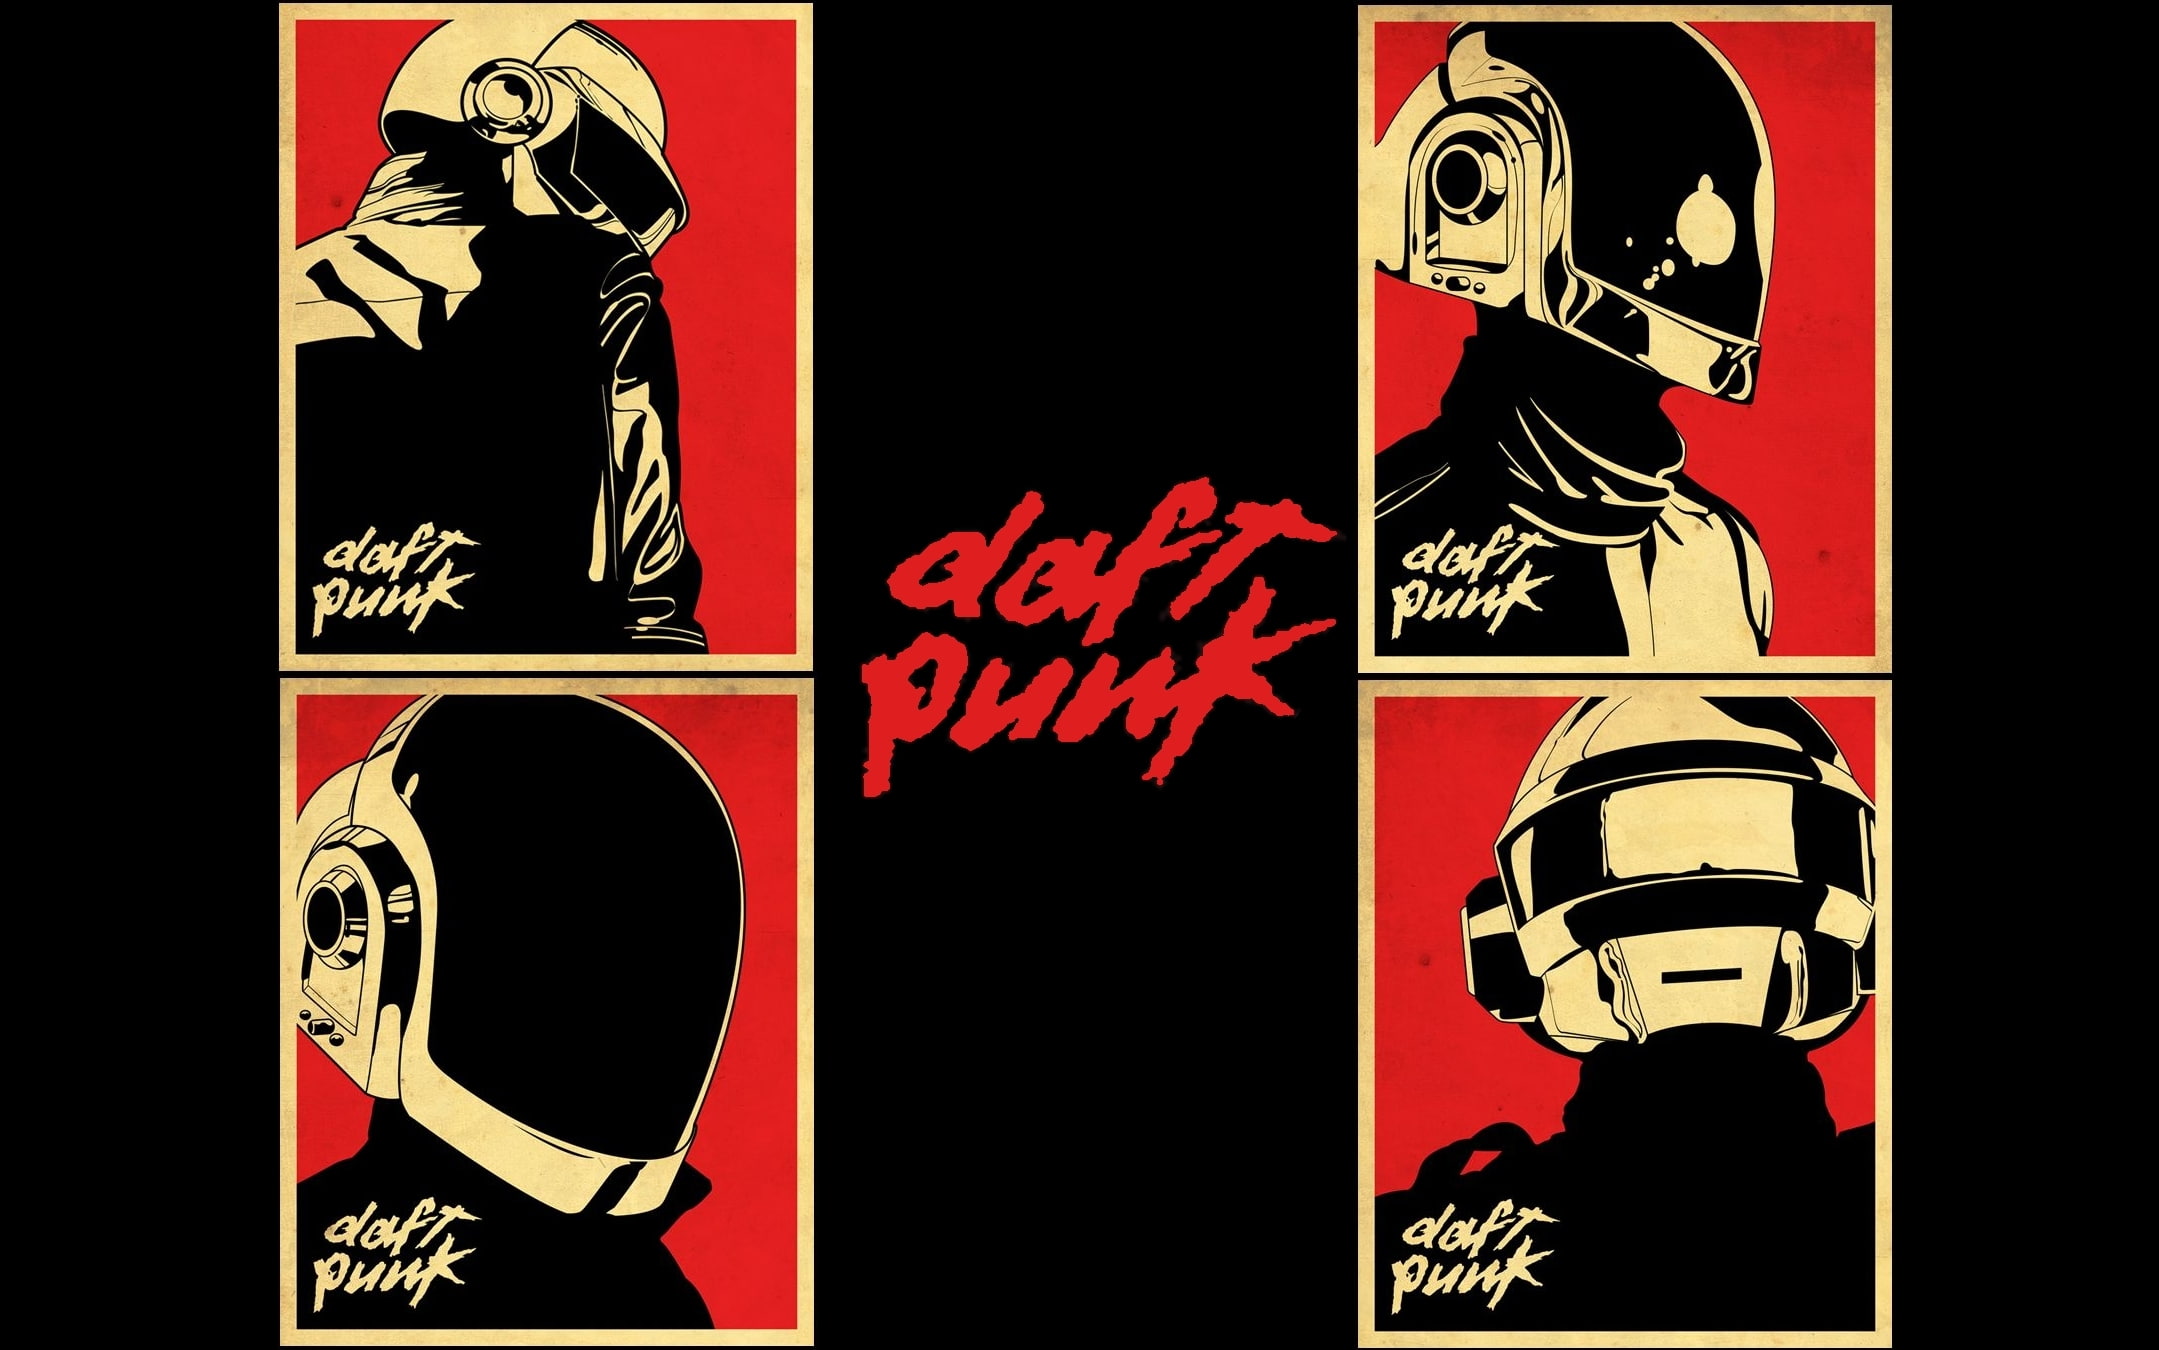 bangalter, color, daft, duo, electronic, electronica, french